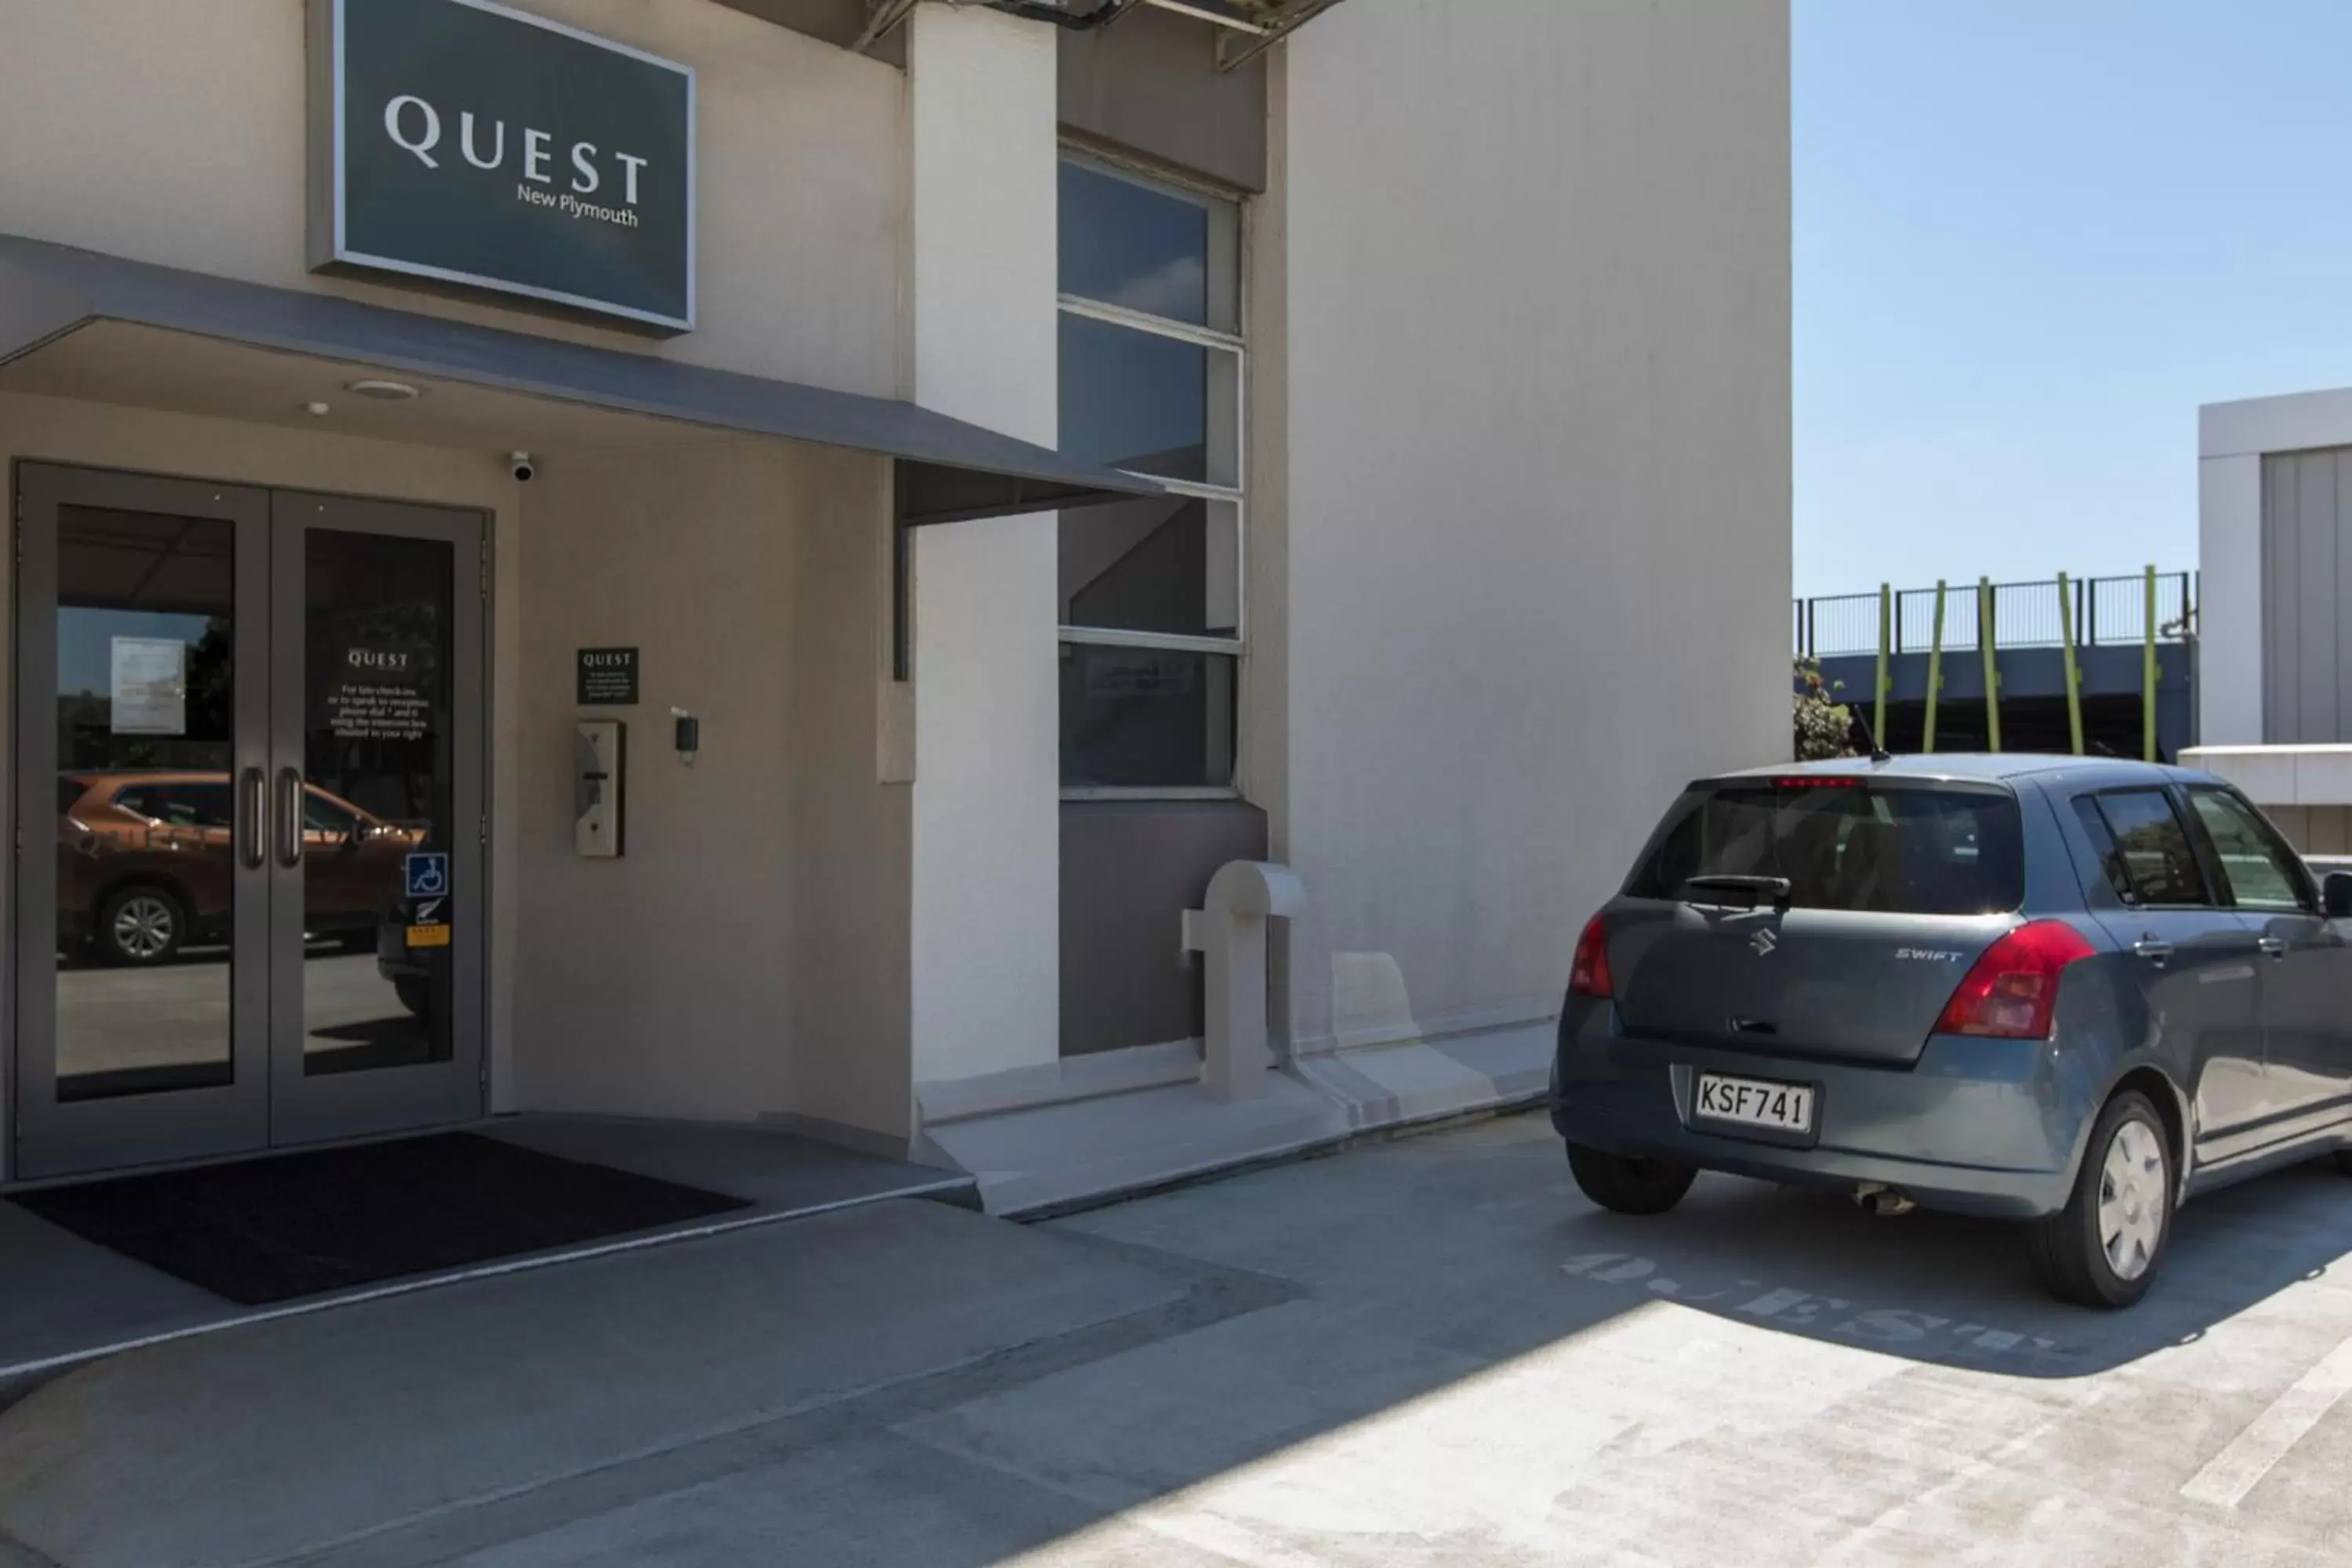 Property Building in Quest New Plymouth Serviced Apartments